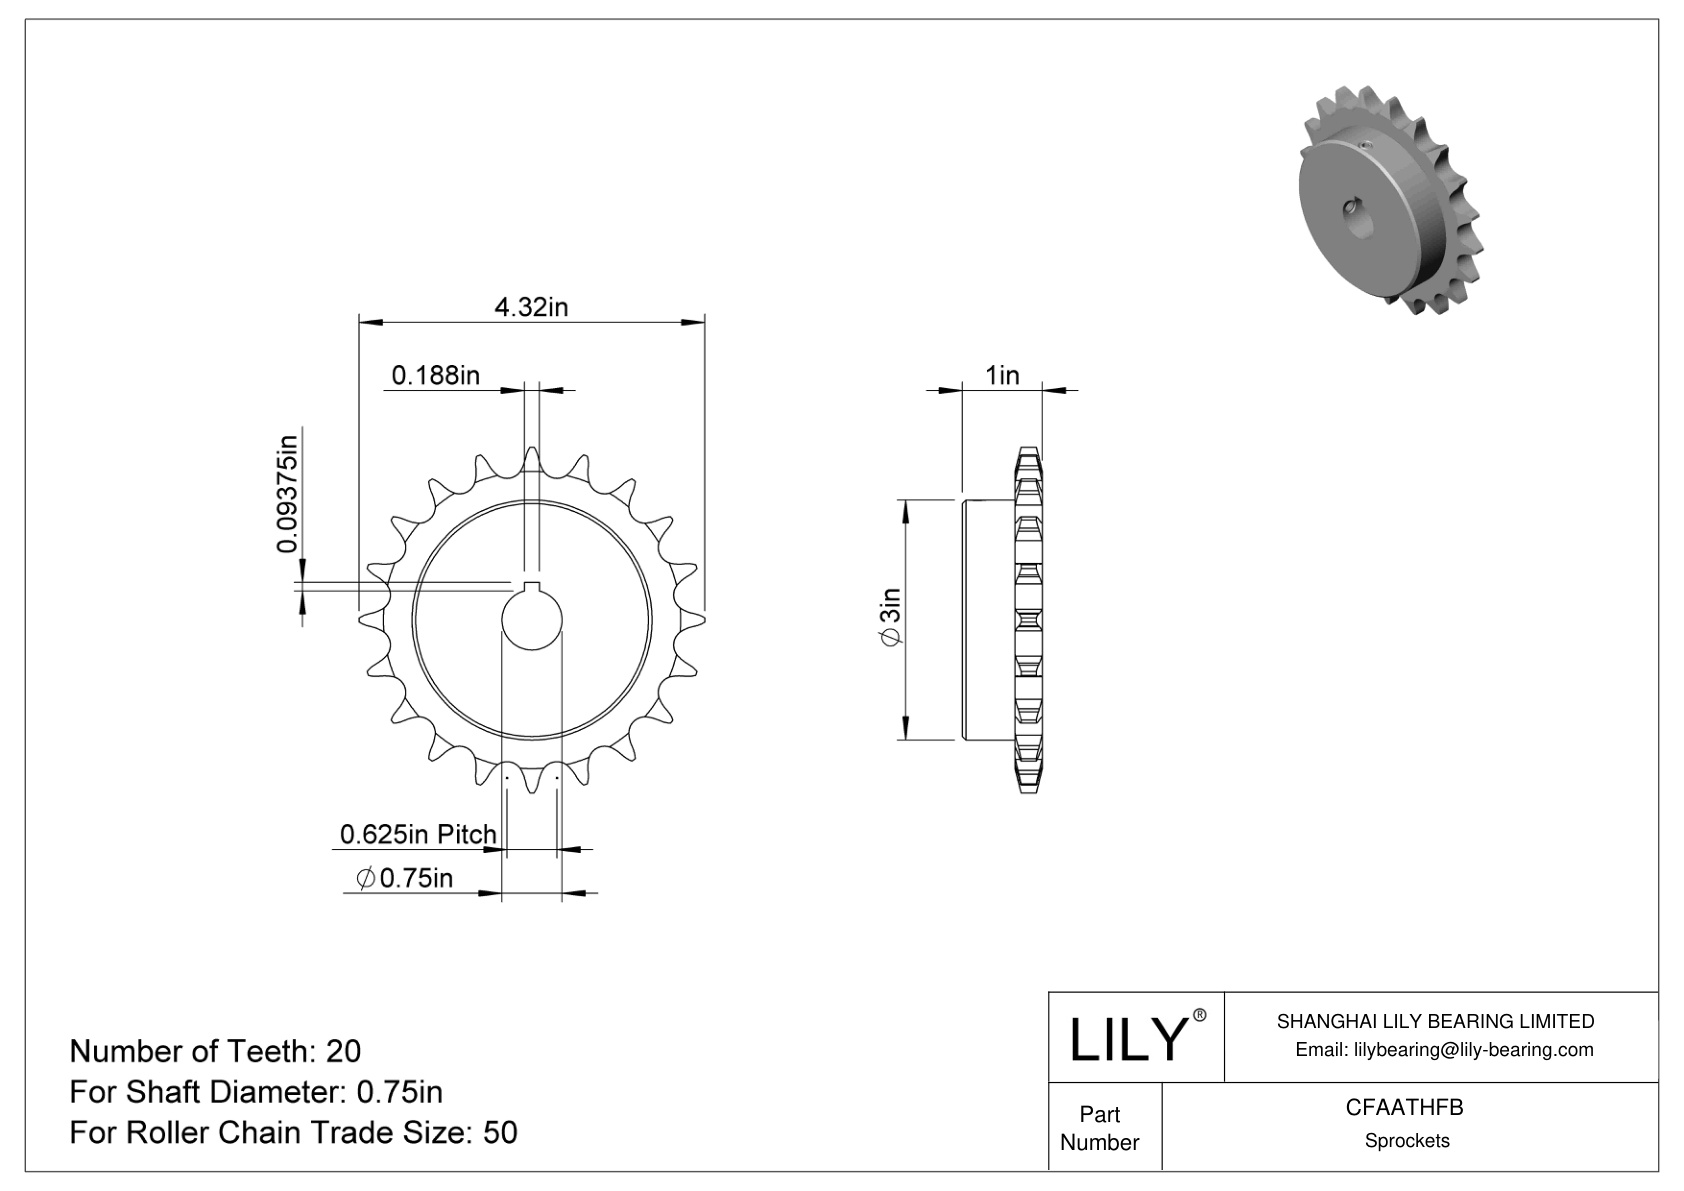 CFAATHFB Wear-Resistant Sprockets for ANSI Roller Chain cad drawing